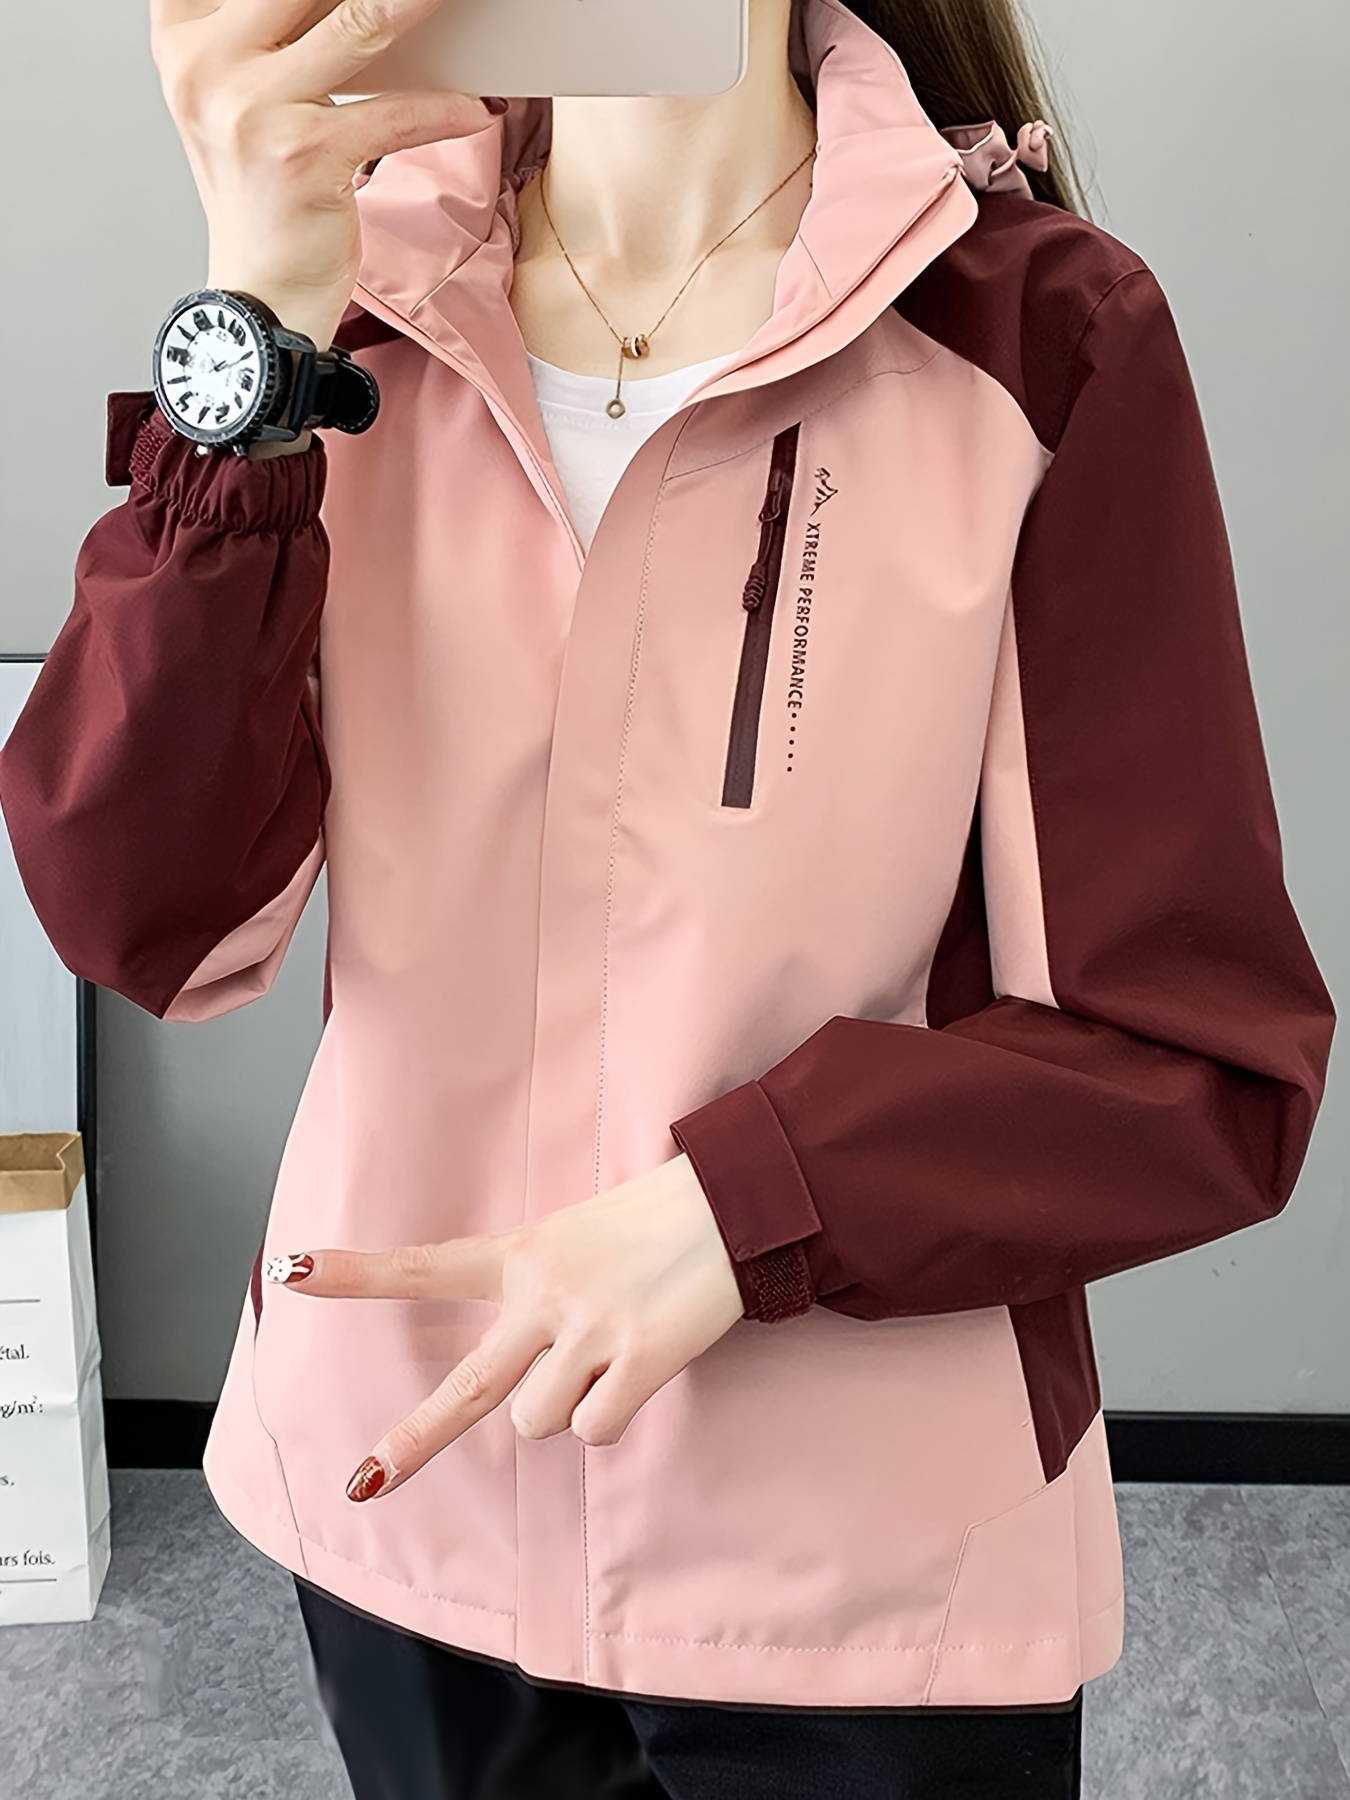 womens outdoor clothing camouflage outdoor jacket with removable hood womens windproof rainproof jacket